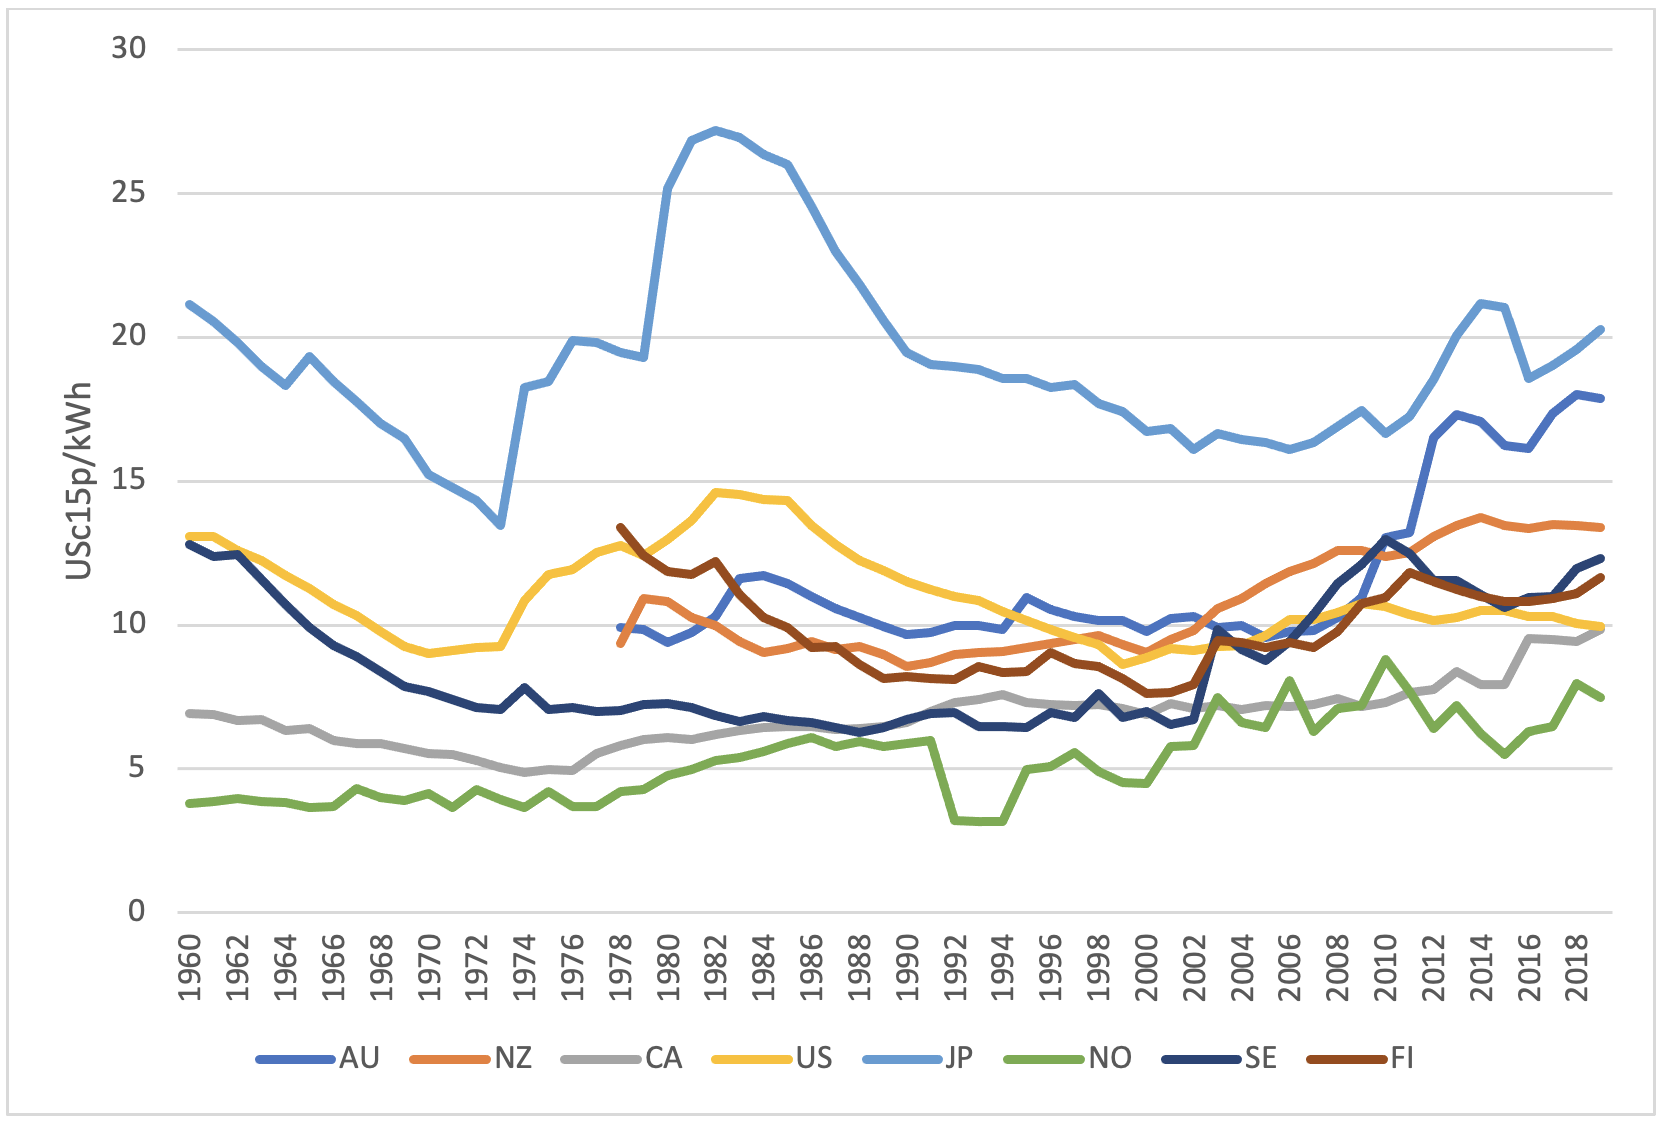 Figure 2. Economy-wide real electricity prices for eight OECD countries with relatively low electricity prices, 1960-2019 (unbalanced).